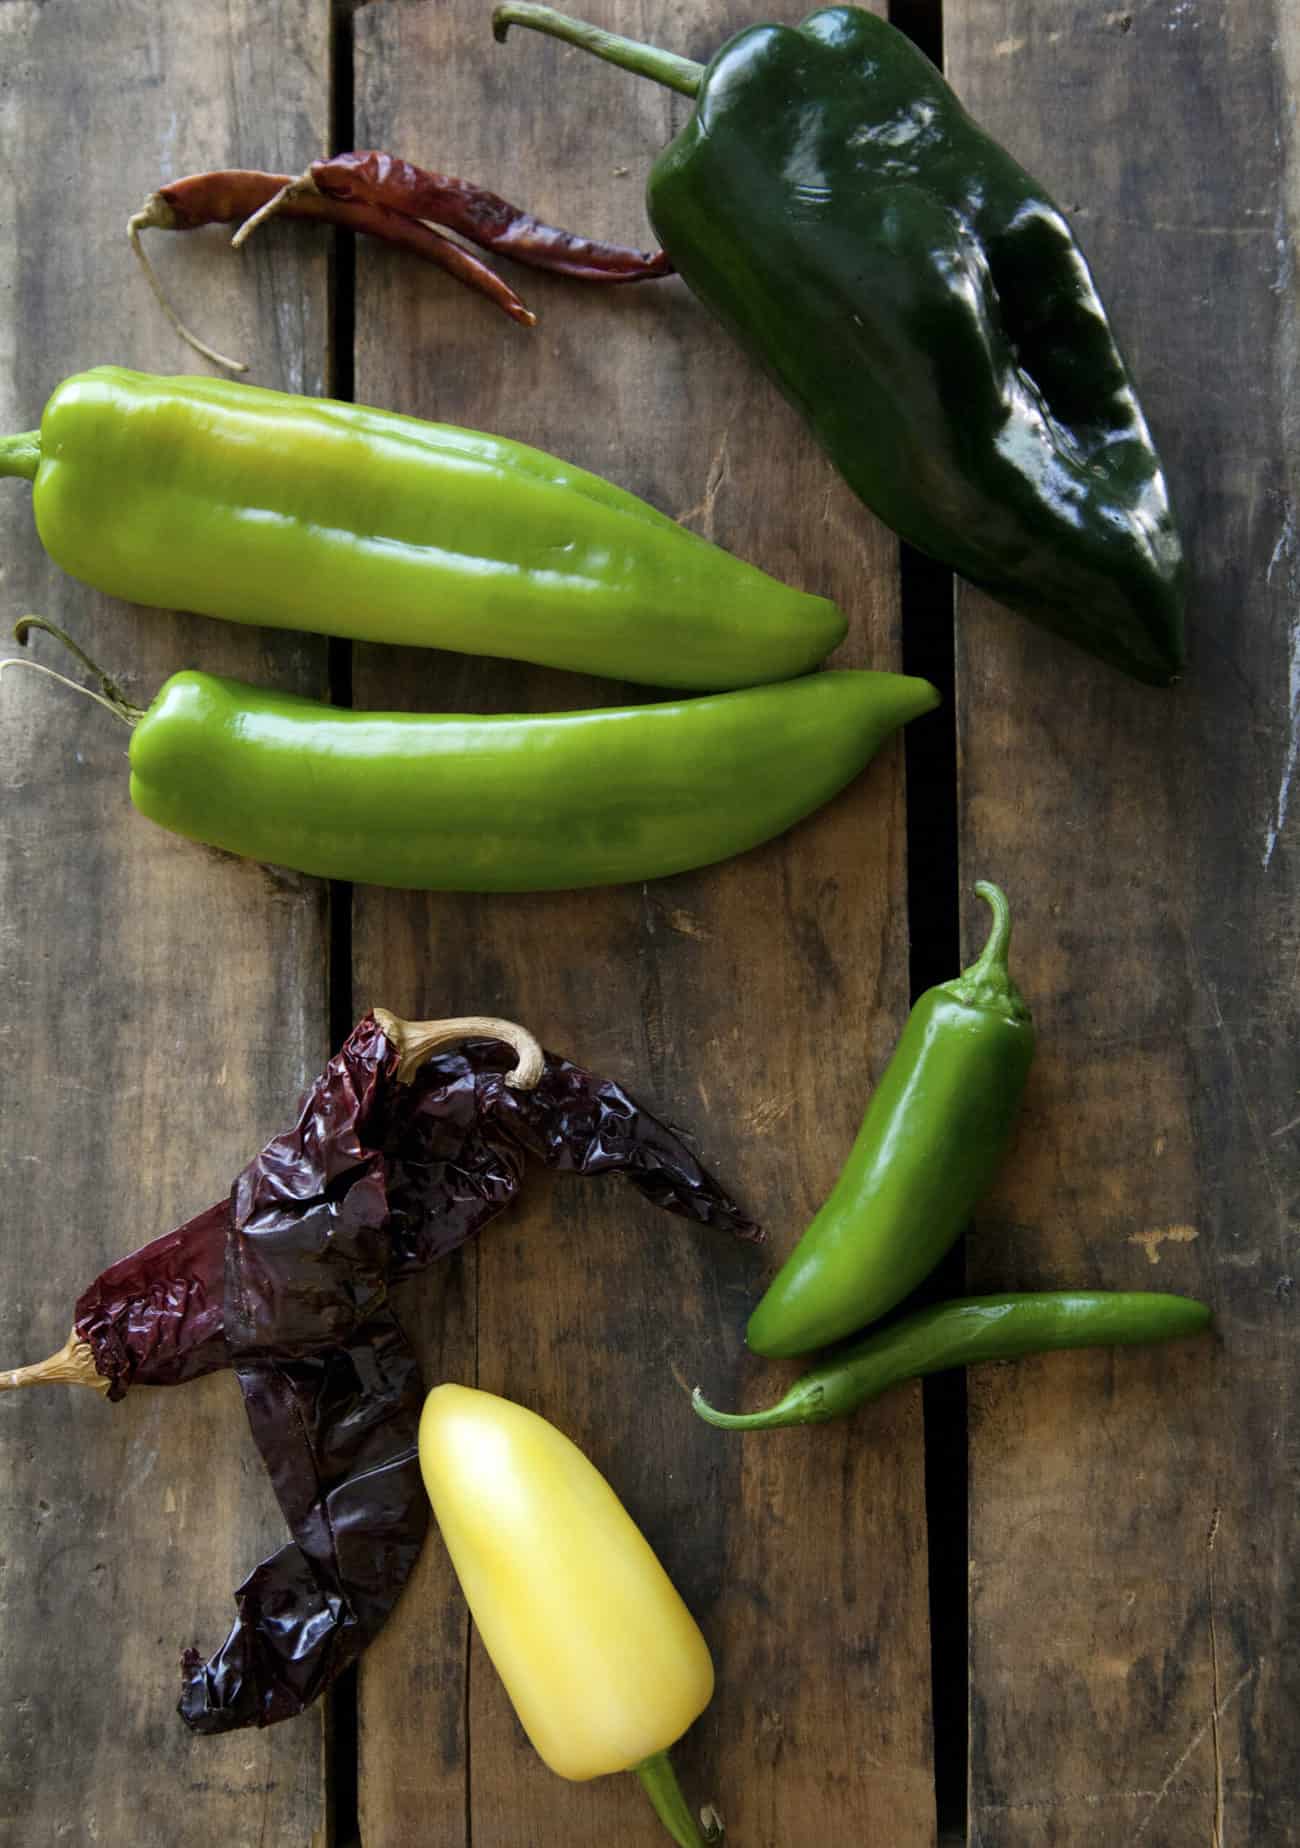 Ultimate Guide to Mexican Chili Peppers